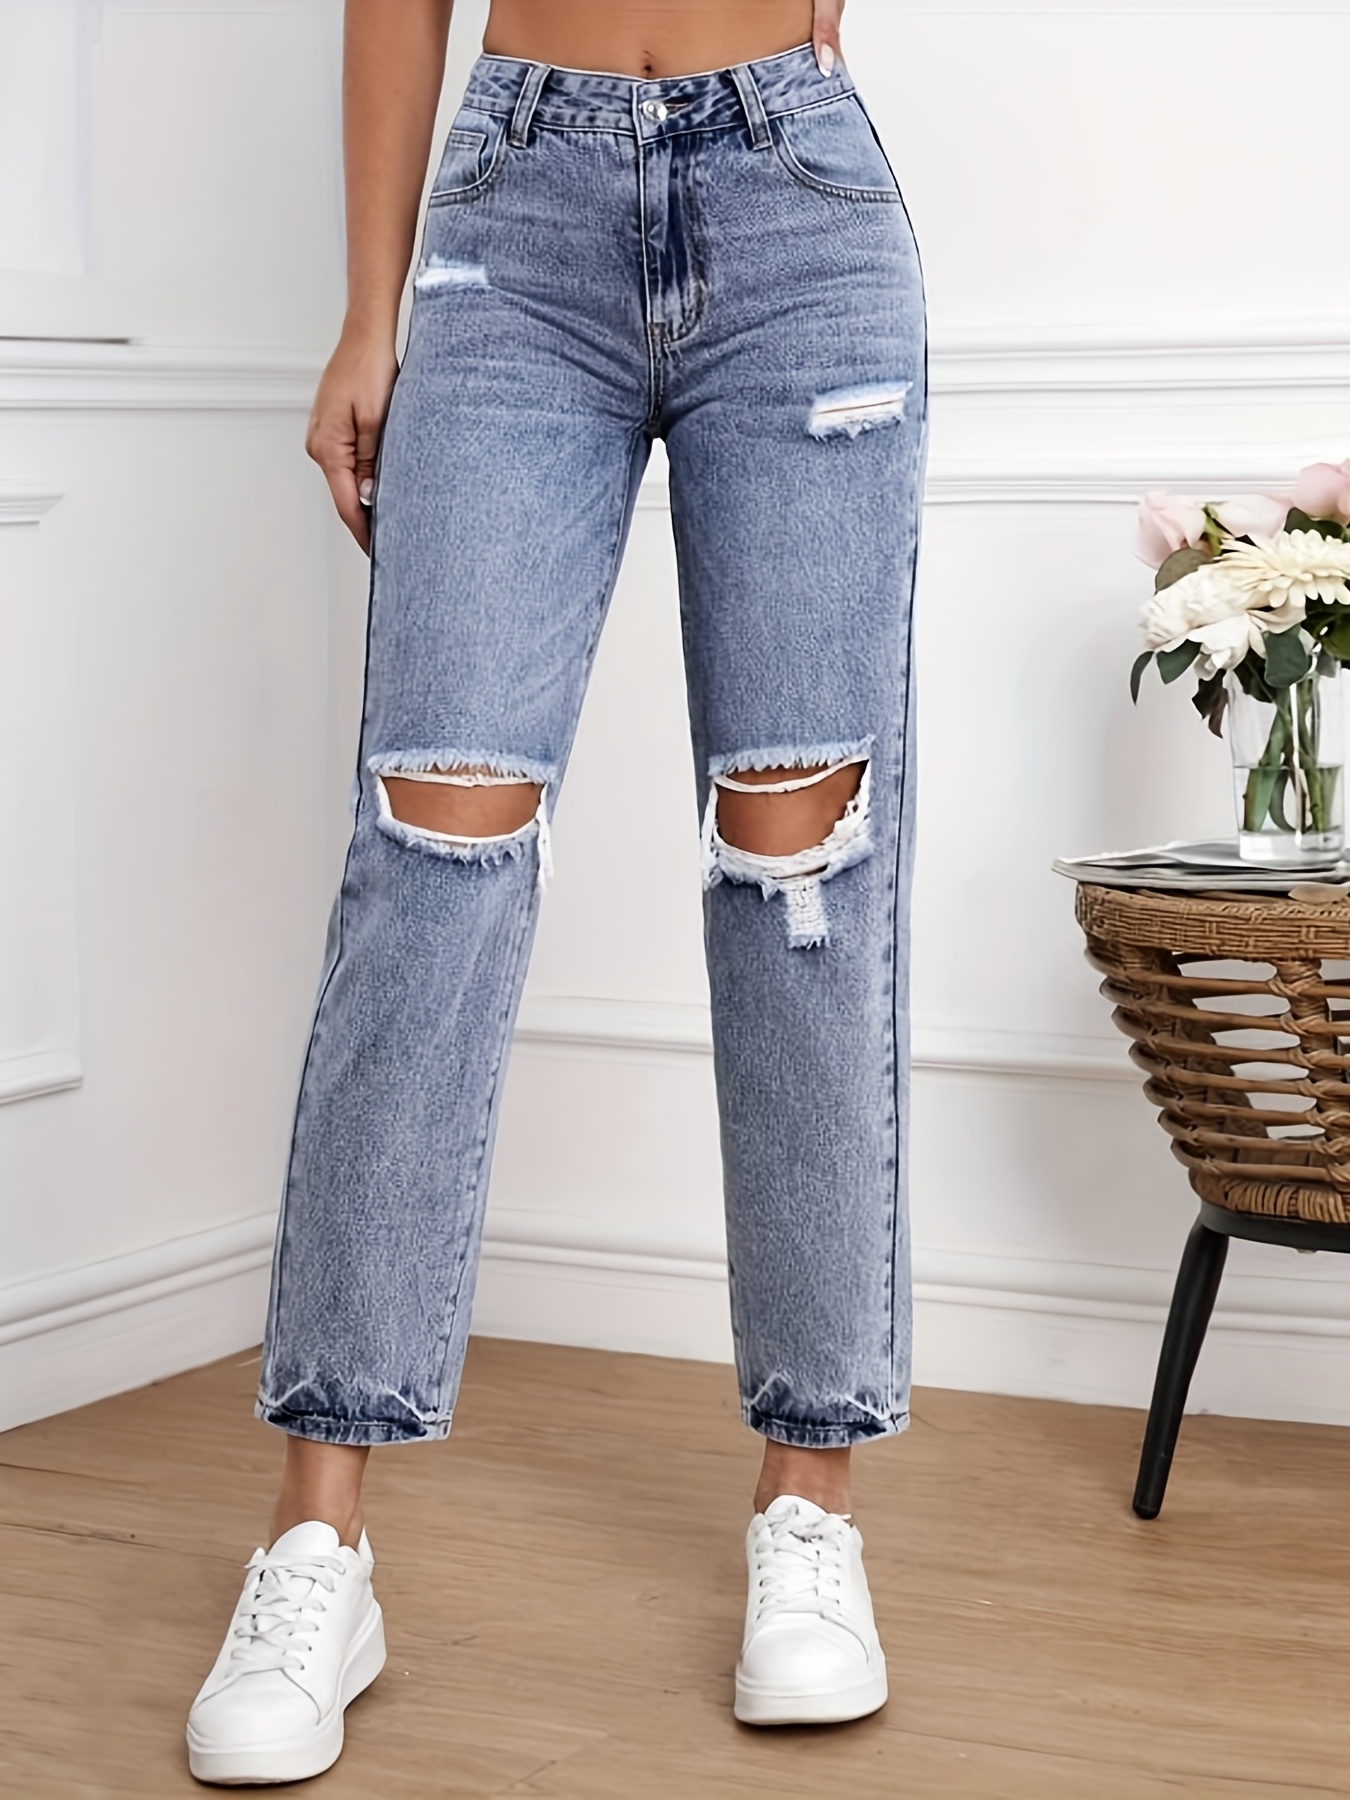 Girls Pants Straight Denim Trousers Elastic Waist Jeans Pants With